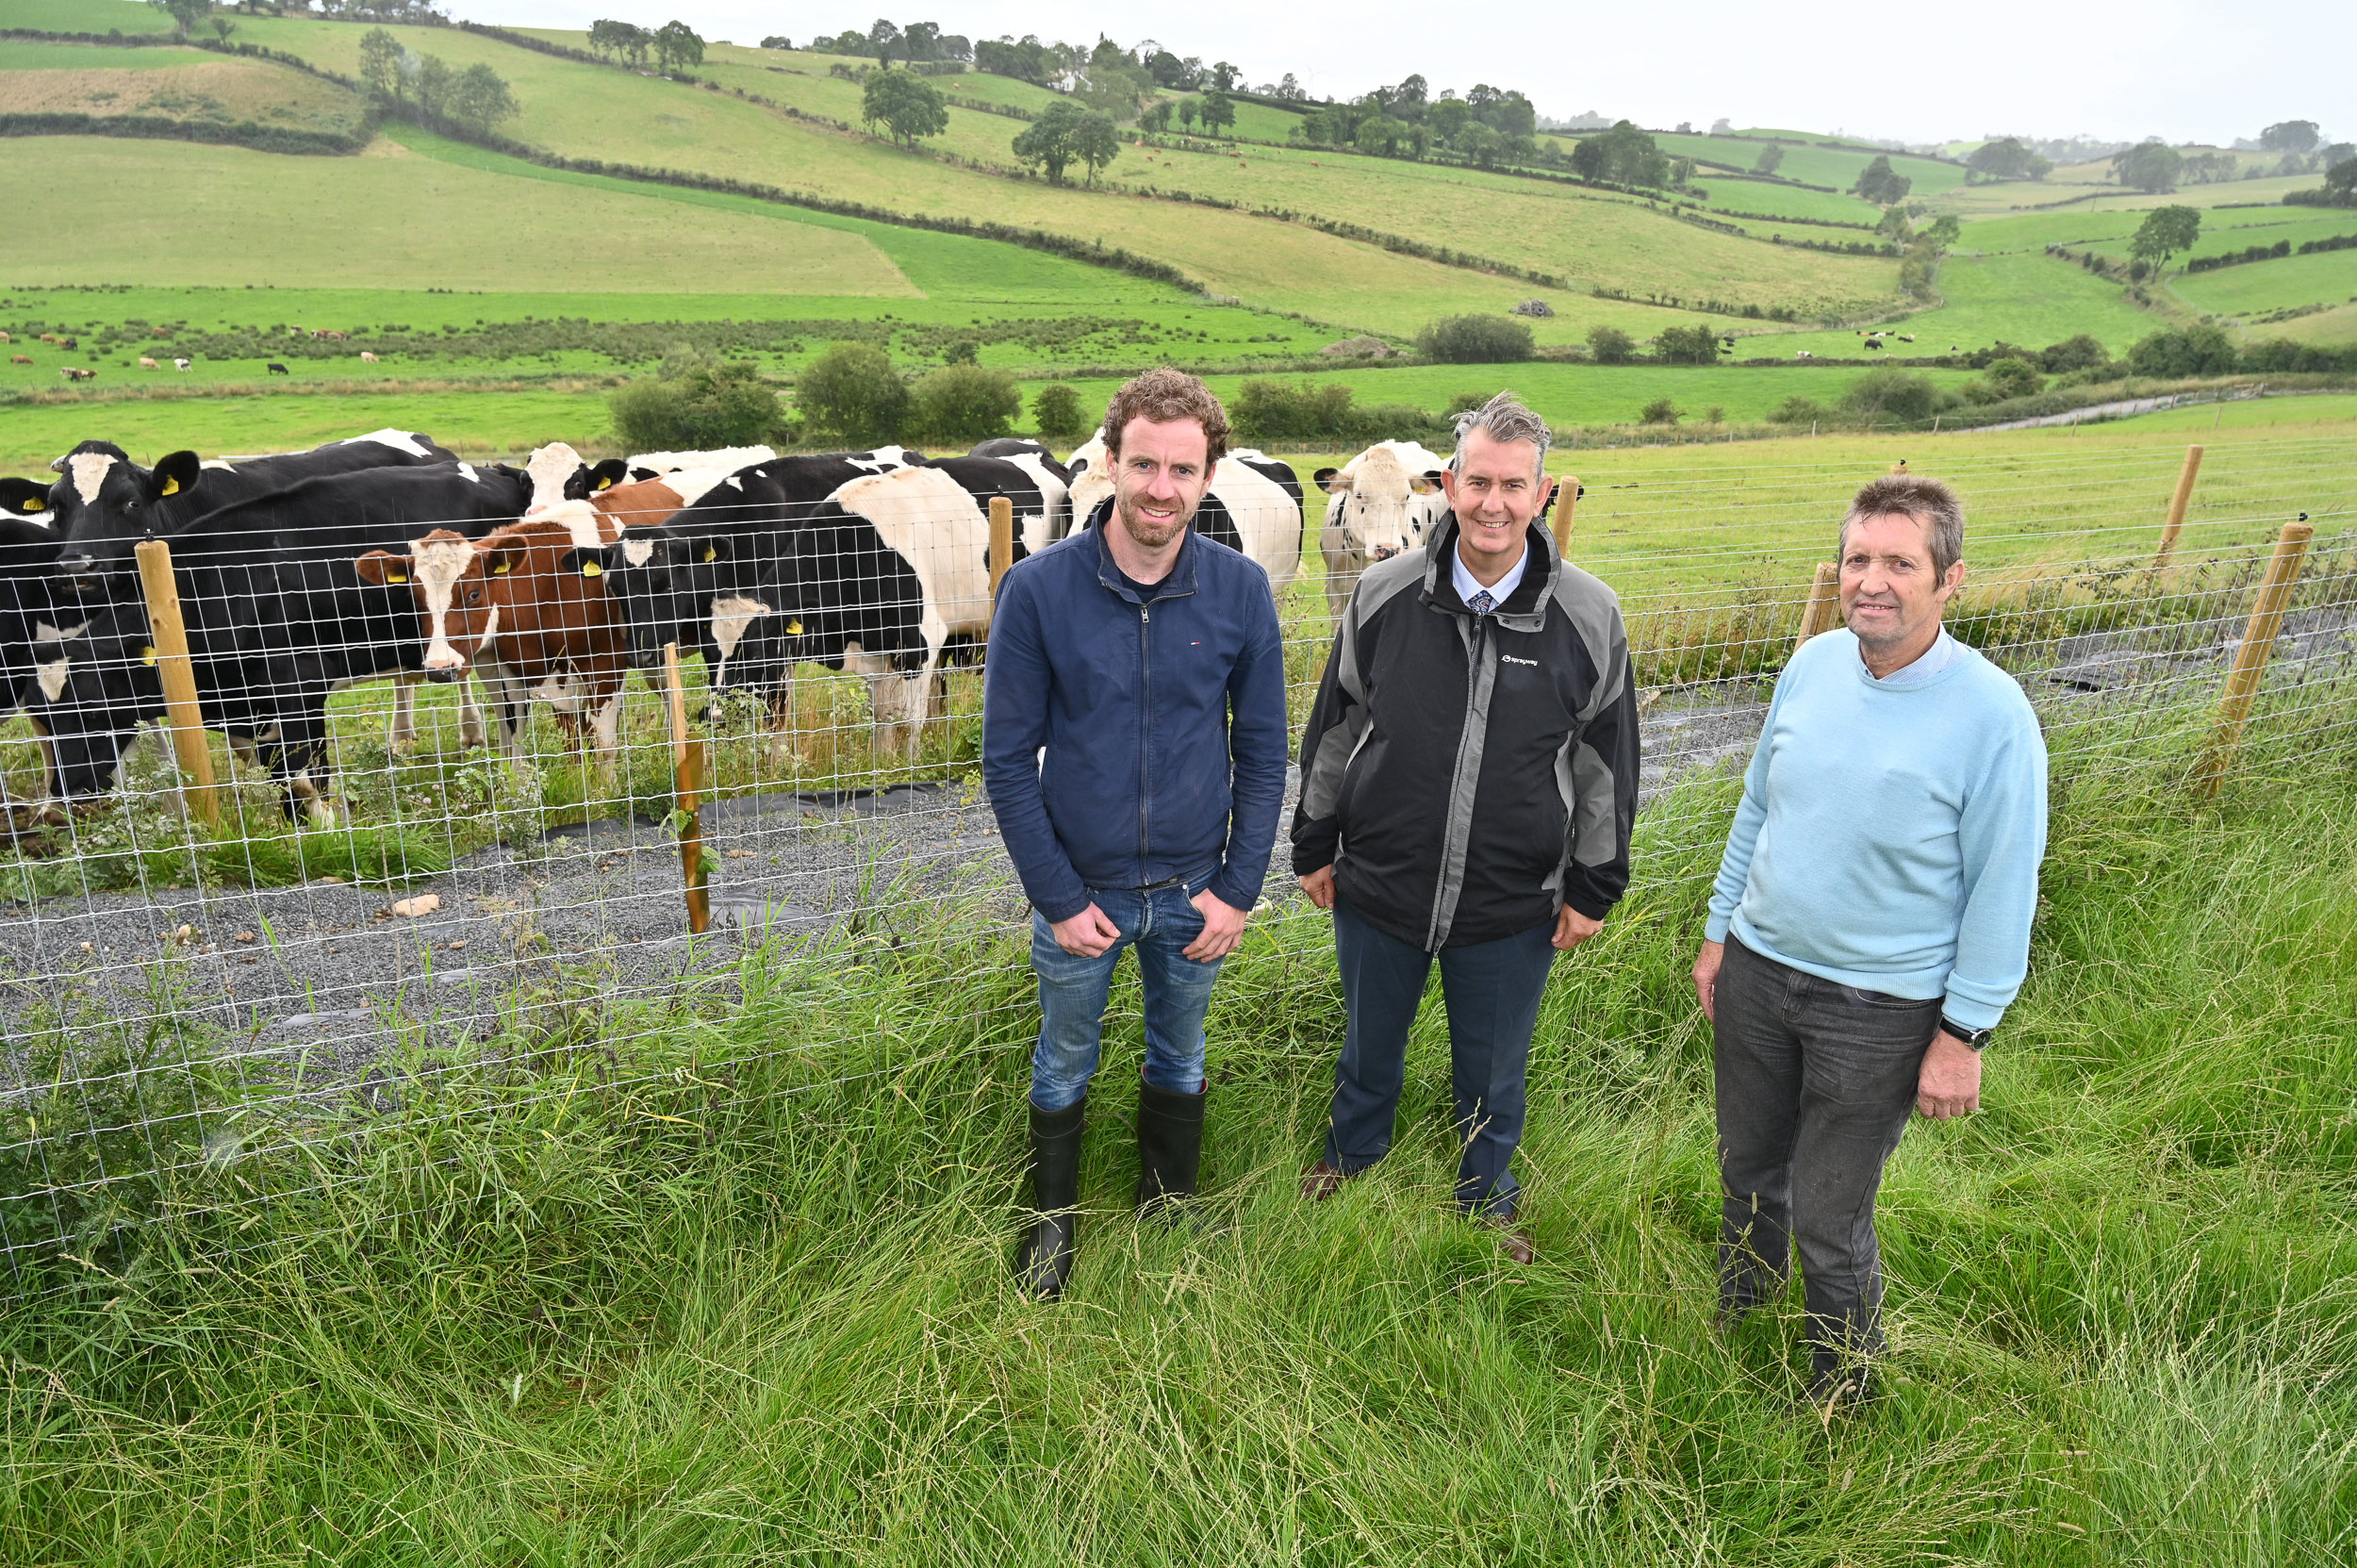 Minister urges farmers to help improve water quality - Newry Times - newry local newspaper